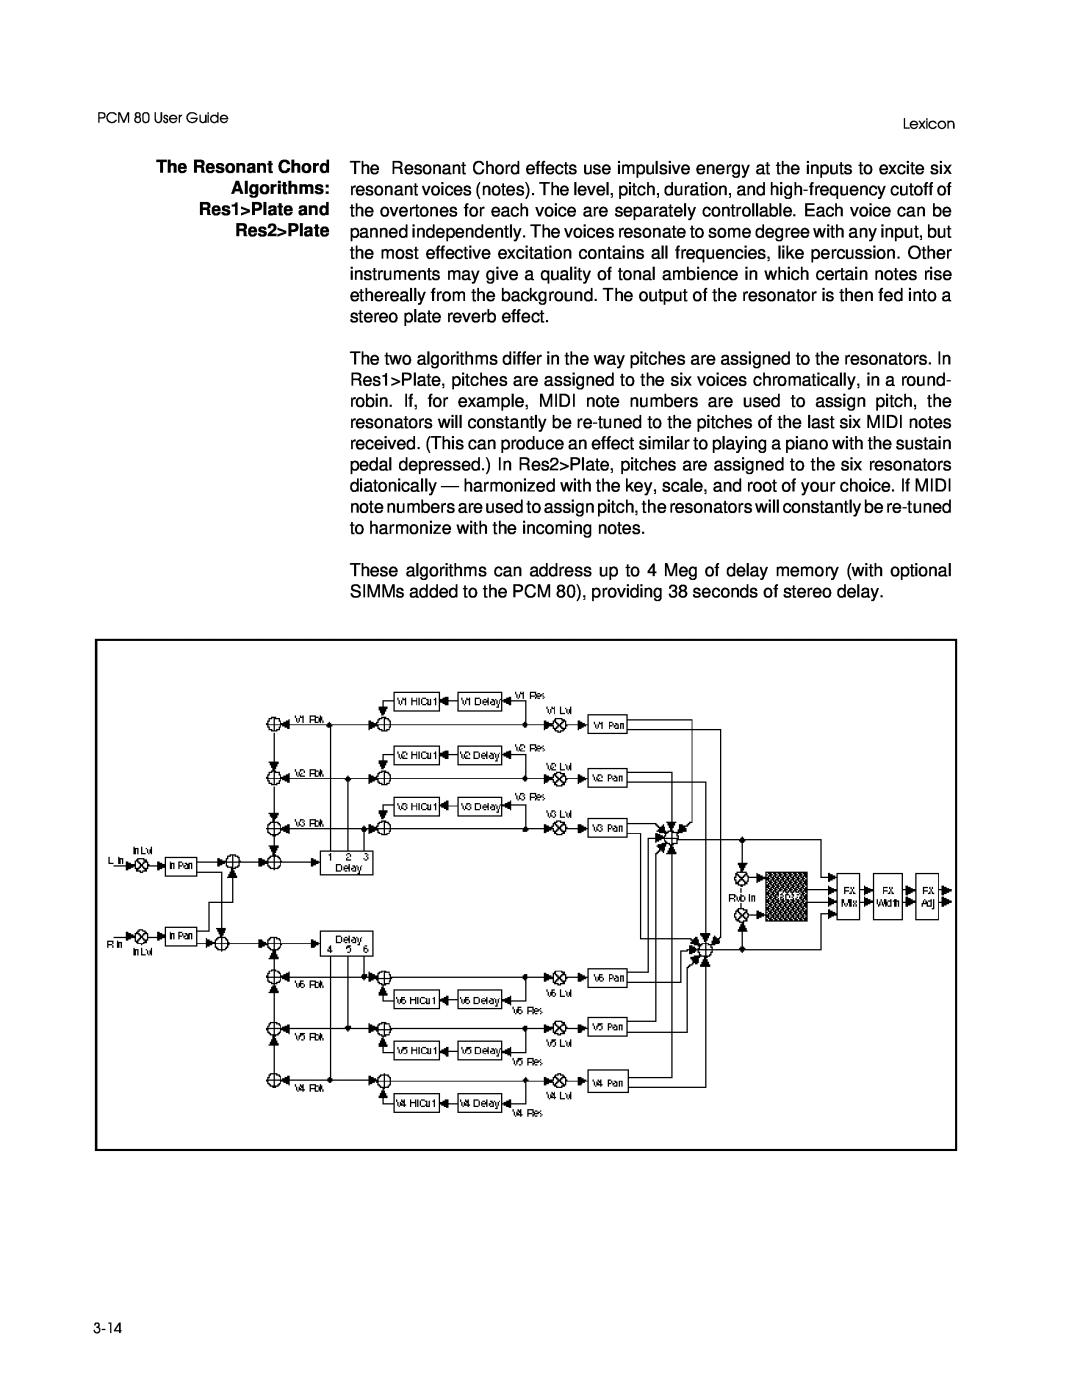 Lexicon manual The Resonant Chord Algorithms Res1>Plate and, Res2 Plate, PCM 80 User Guide, Lexicon, 3-14 